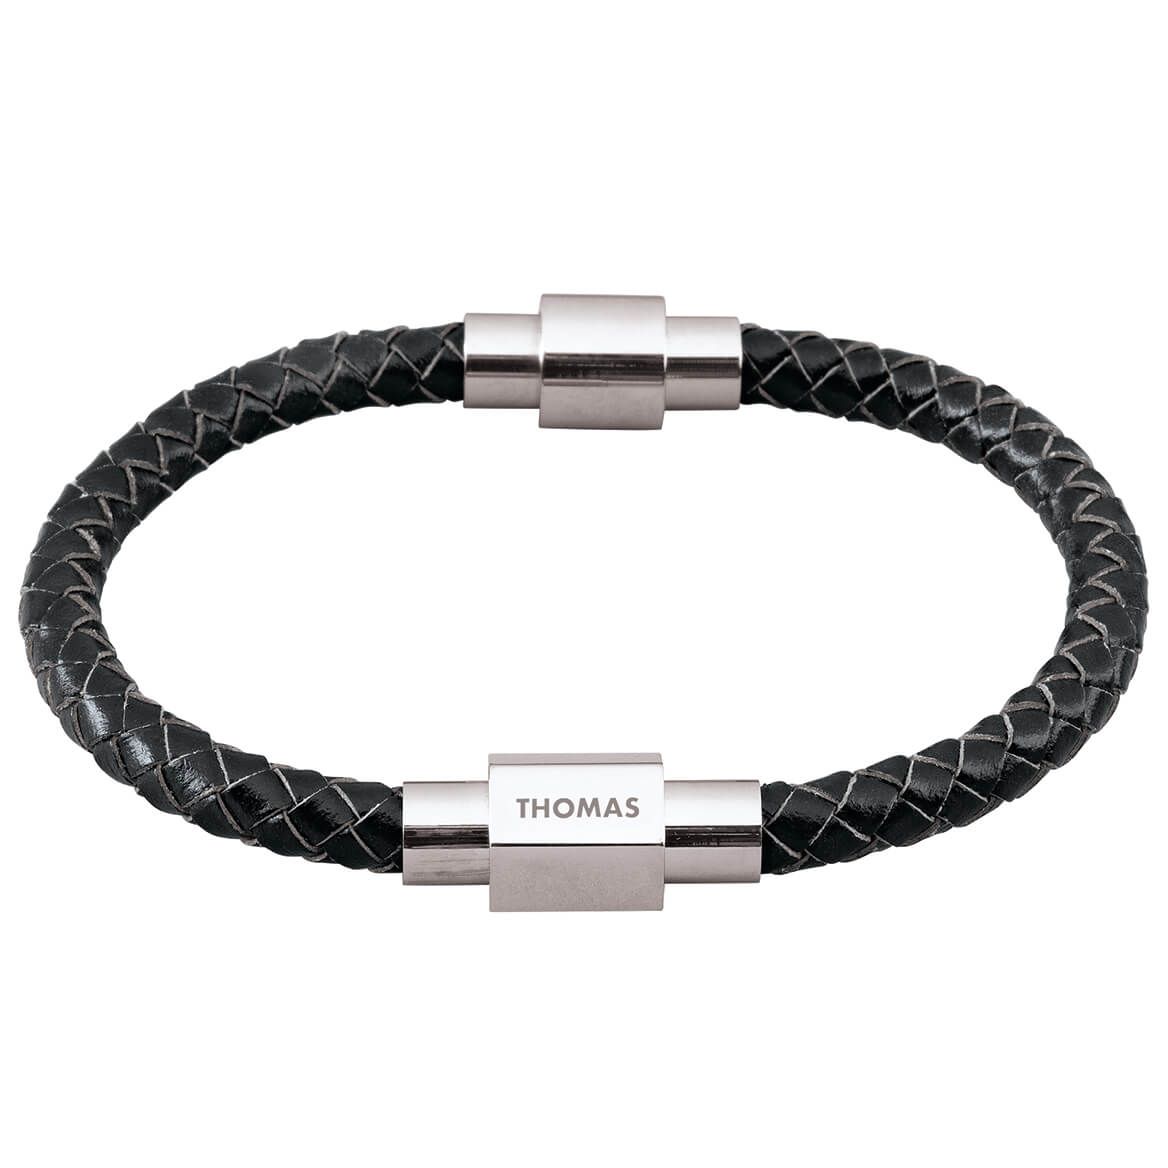 Personalized Leather Rope Bracelet + '-' + 371267